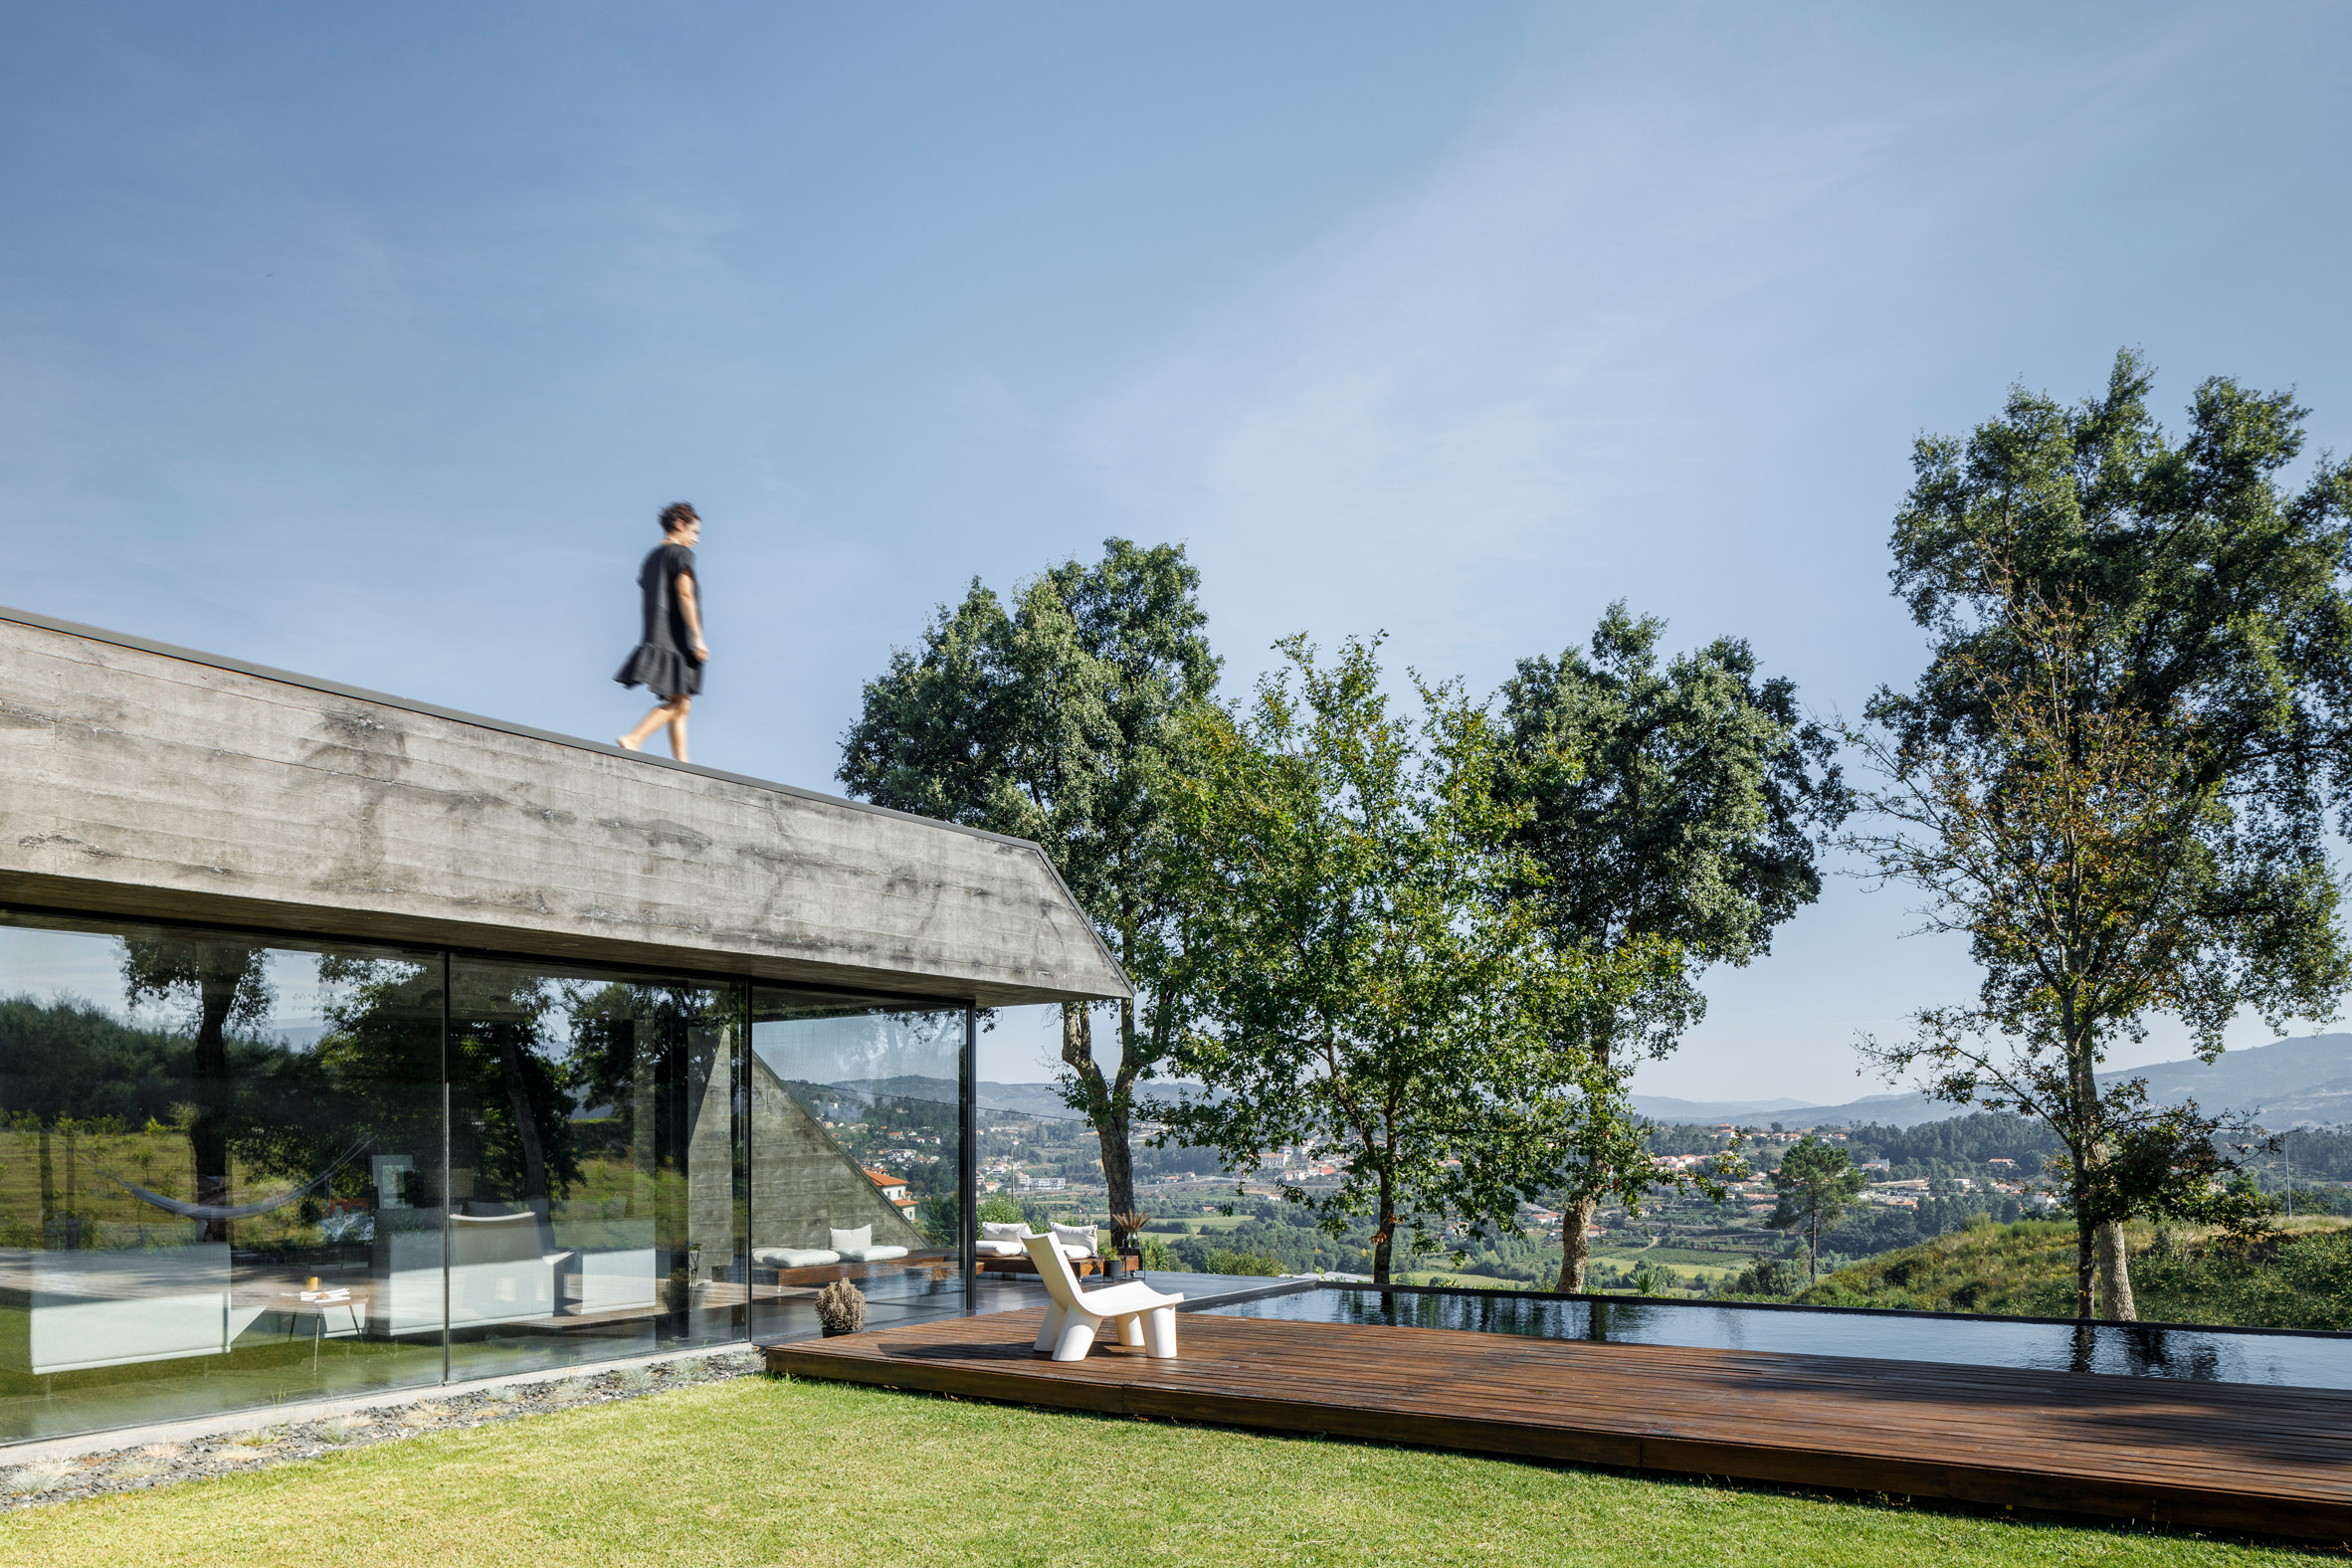 A hilltop concrete house with a roof terrace